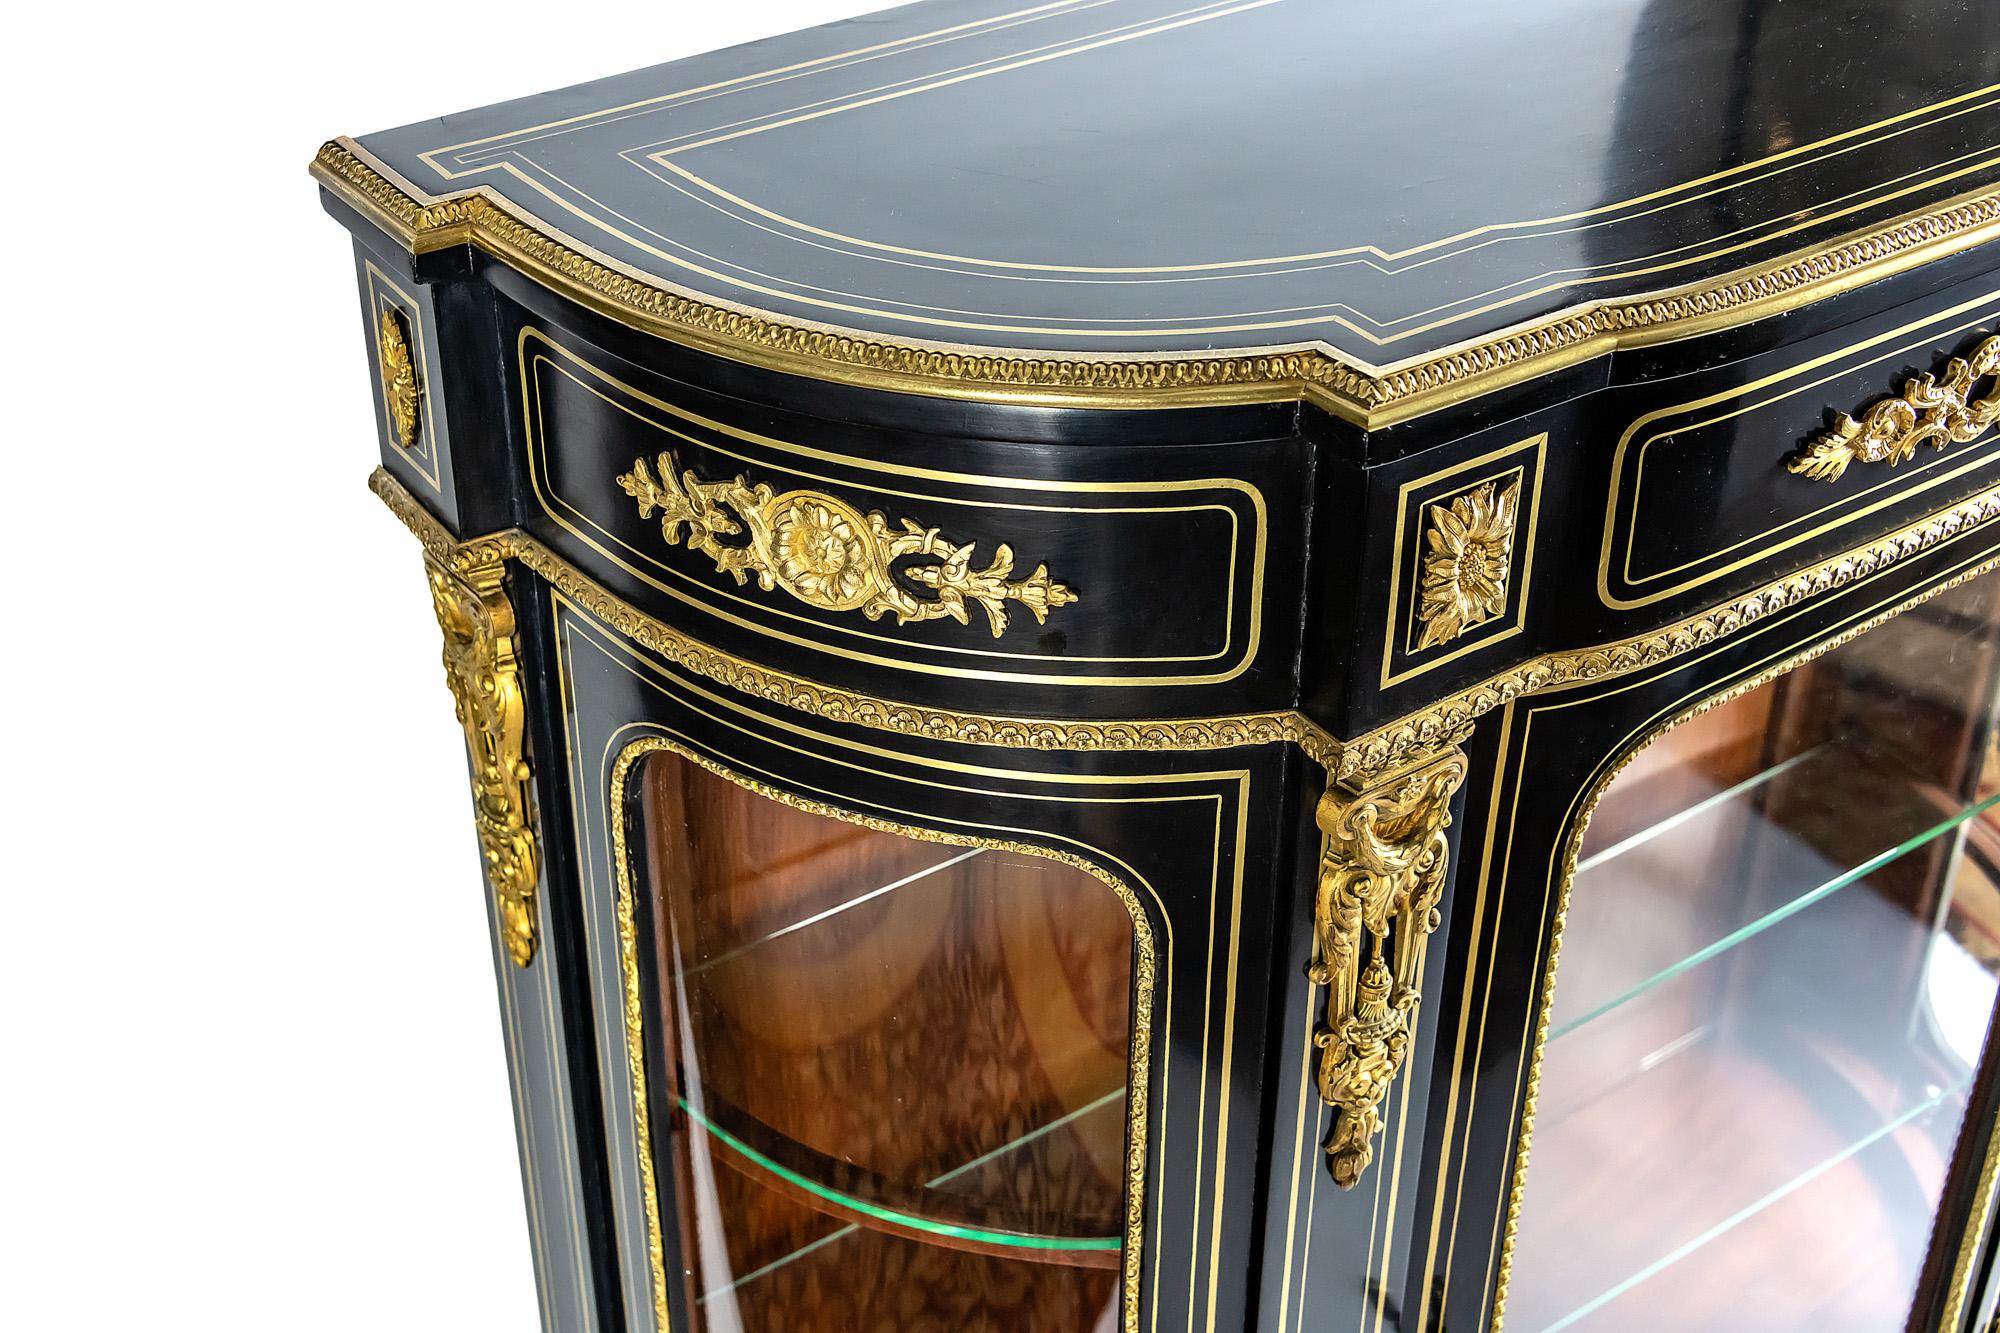 French antique Napoleon III vitrine cabinet is after renovation. Wood is decorated with inlaid brass and bronze details. Inside there are two glass shelves. Side parts are with perfect curved glass.